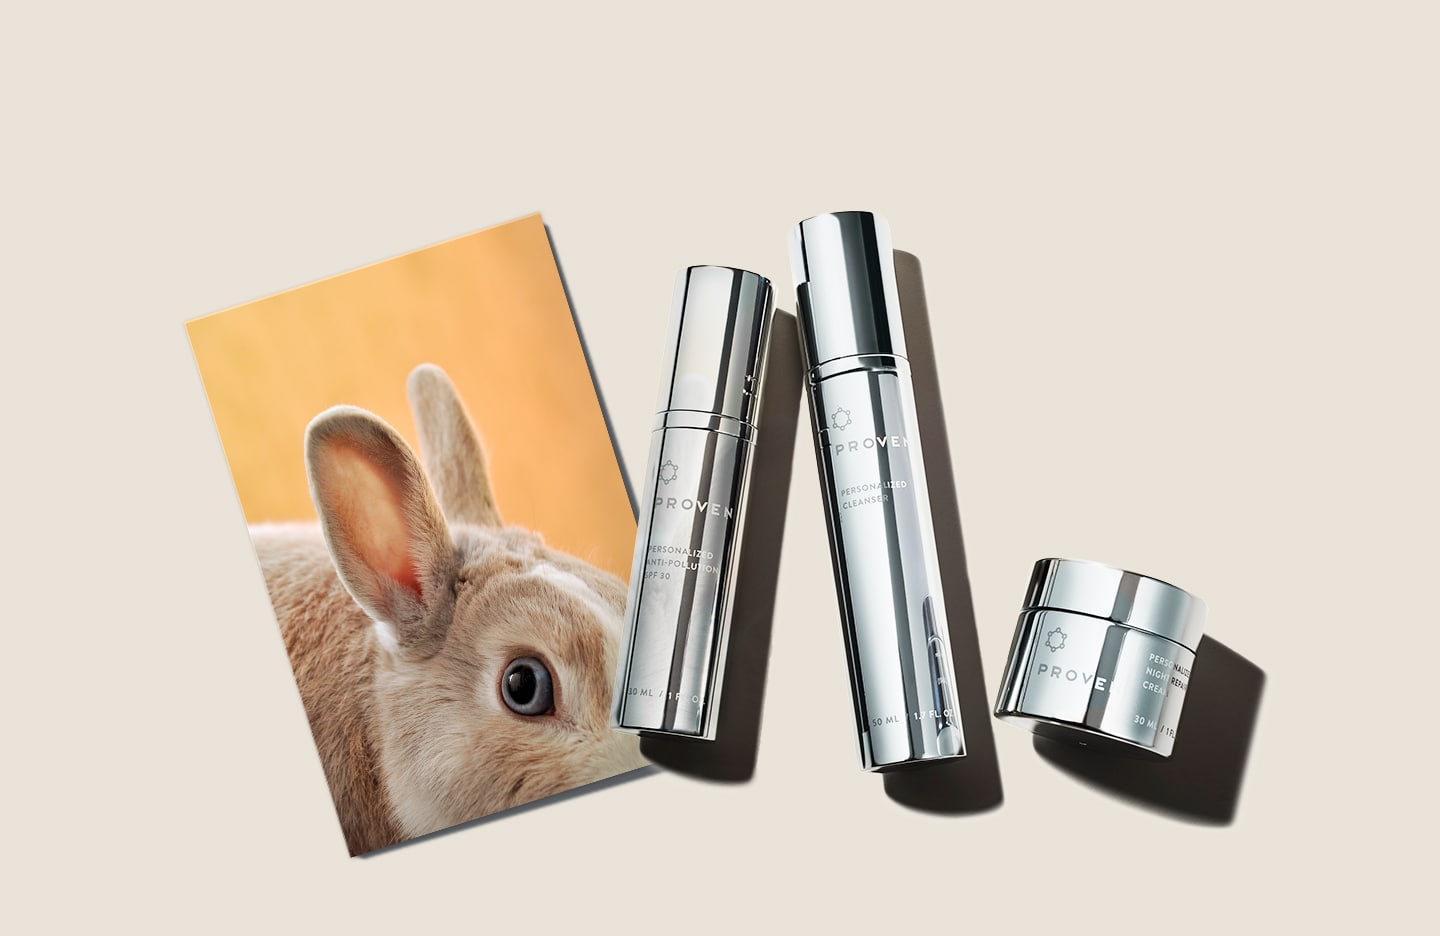 Cruelty Free Skincare Products | No Animal Testing